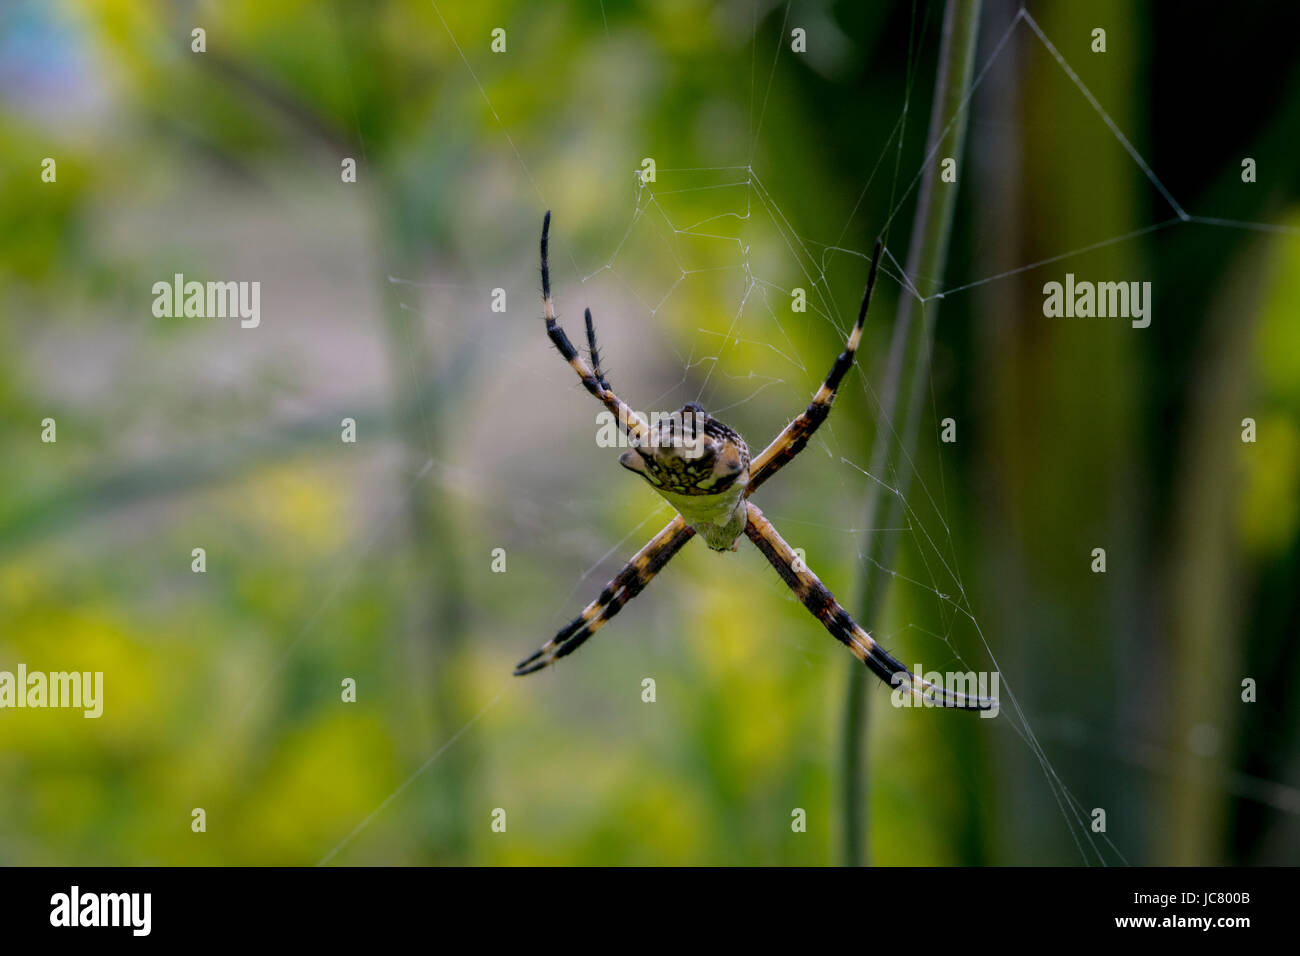 Big spider waiting for prey on its web Stock Photo